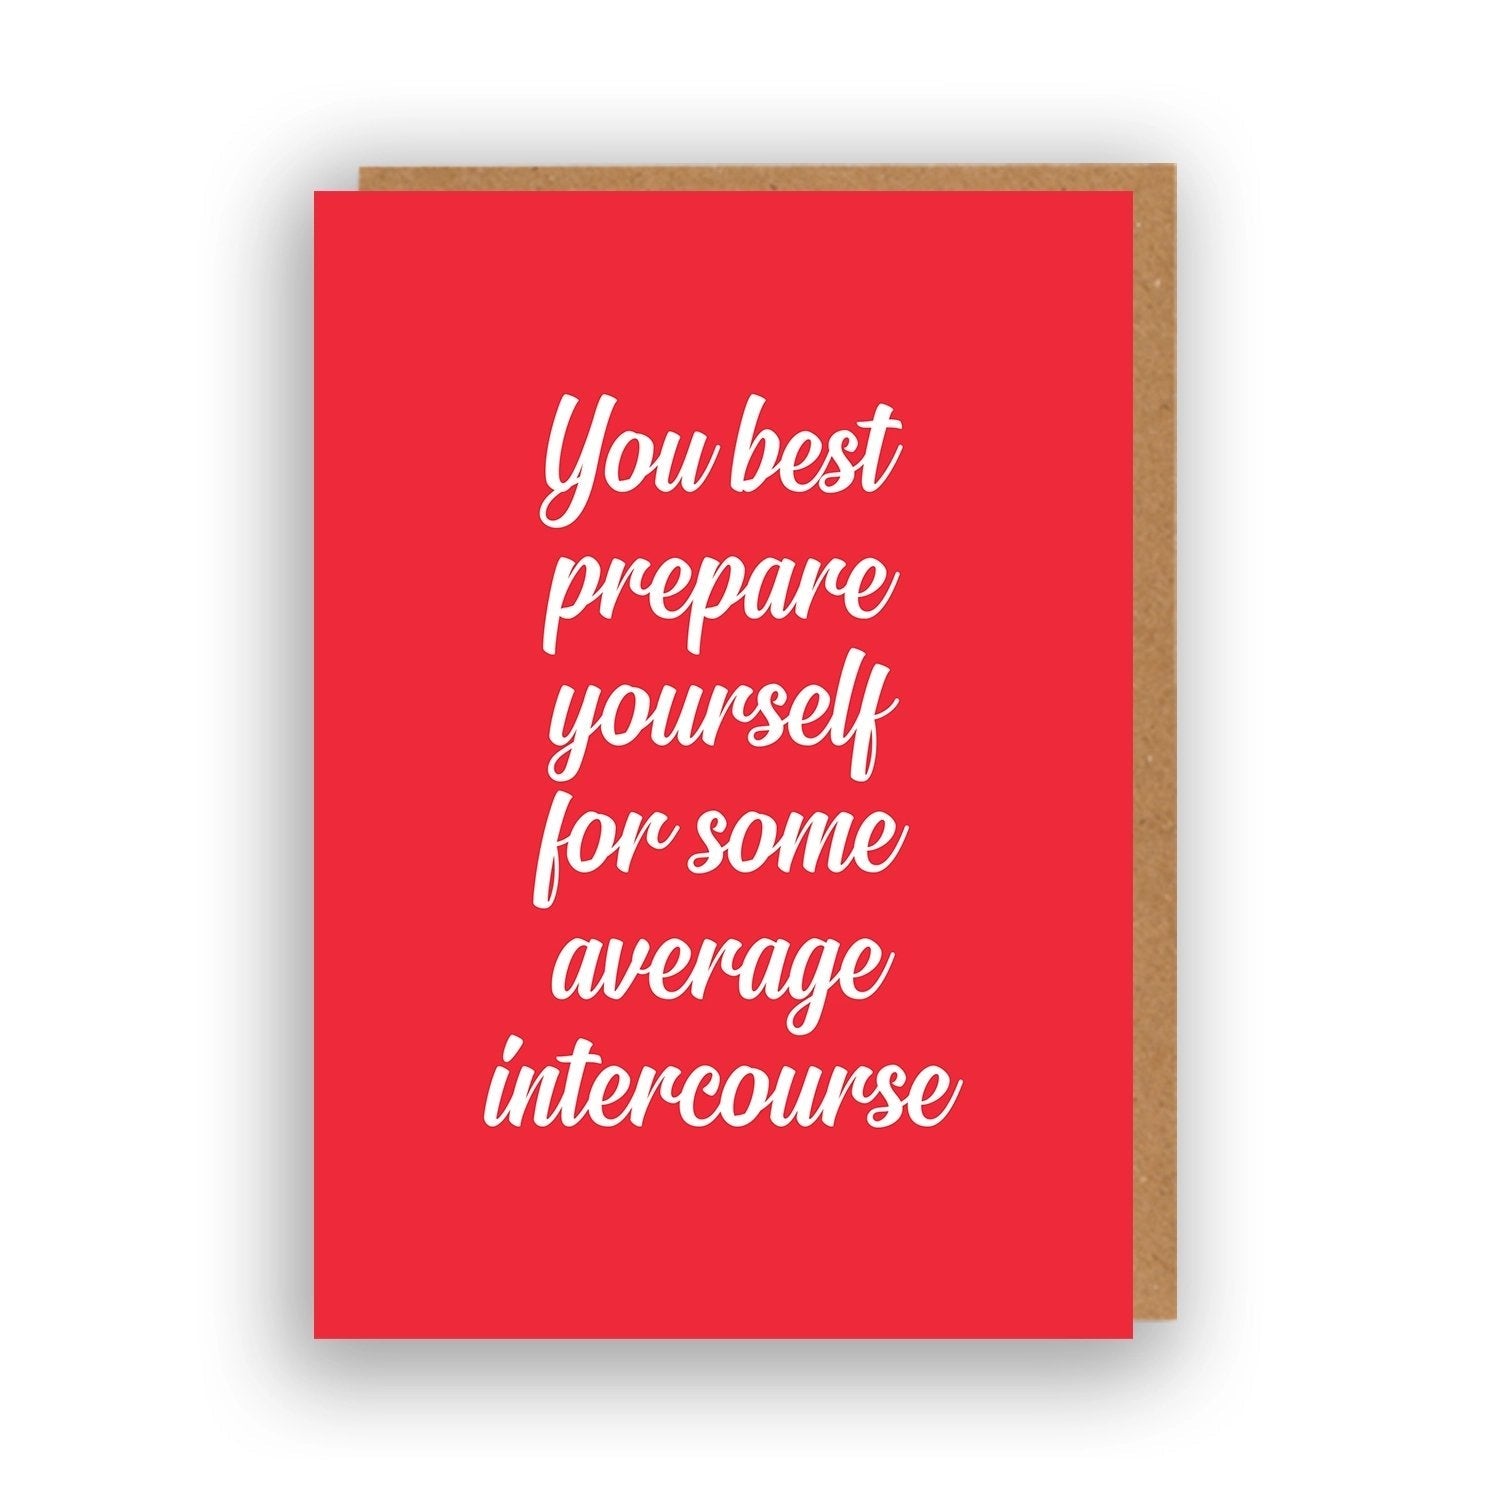 You Best Prepare Yourself For Some Average Intercourse Greeting Card in Red